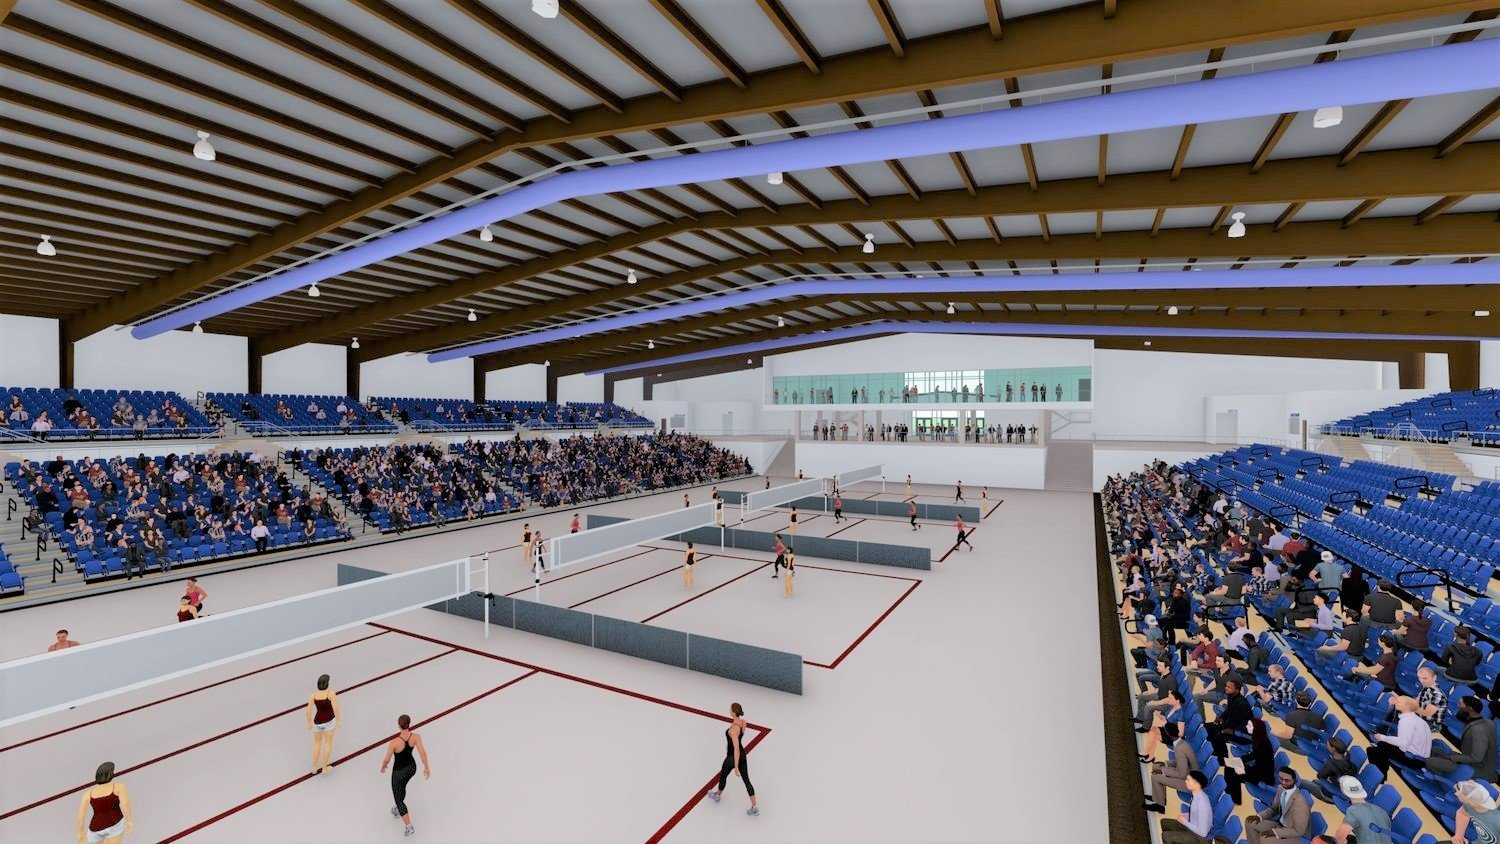 The Arena League founder Tim Brown says Ozark Empire Fairgrounds' new arena "is a huge plus” in the selection process. A groundbreaking for the Springfield arena was held late last year.